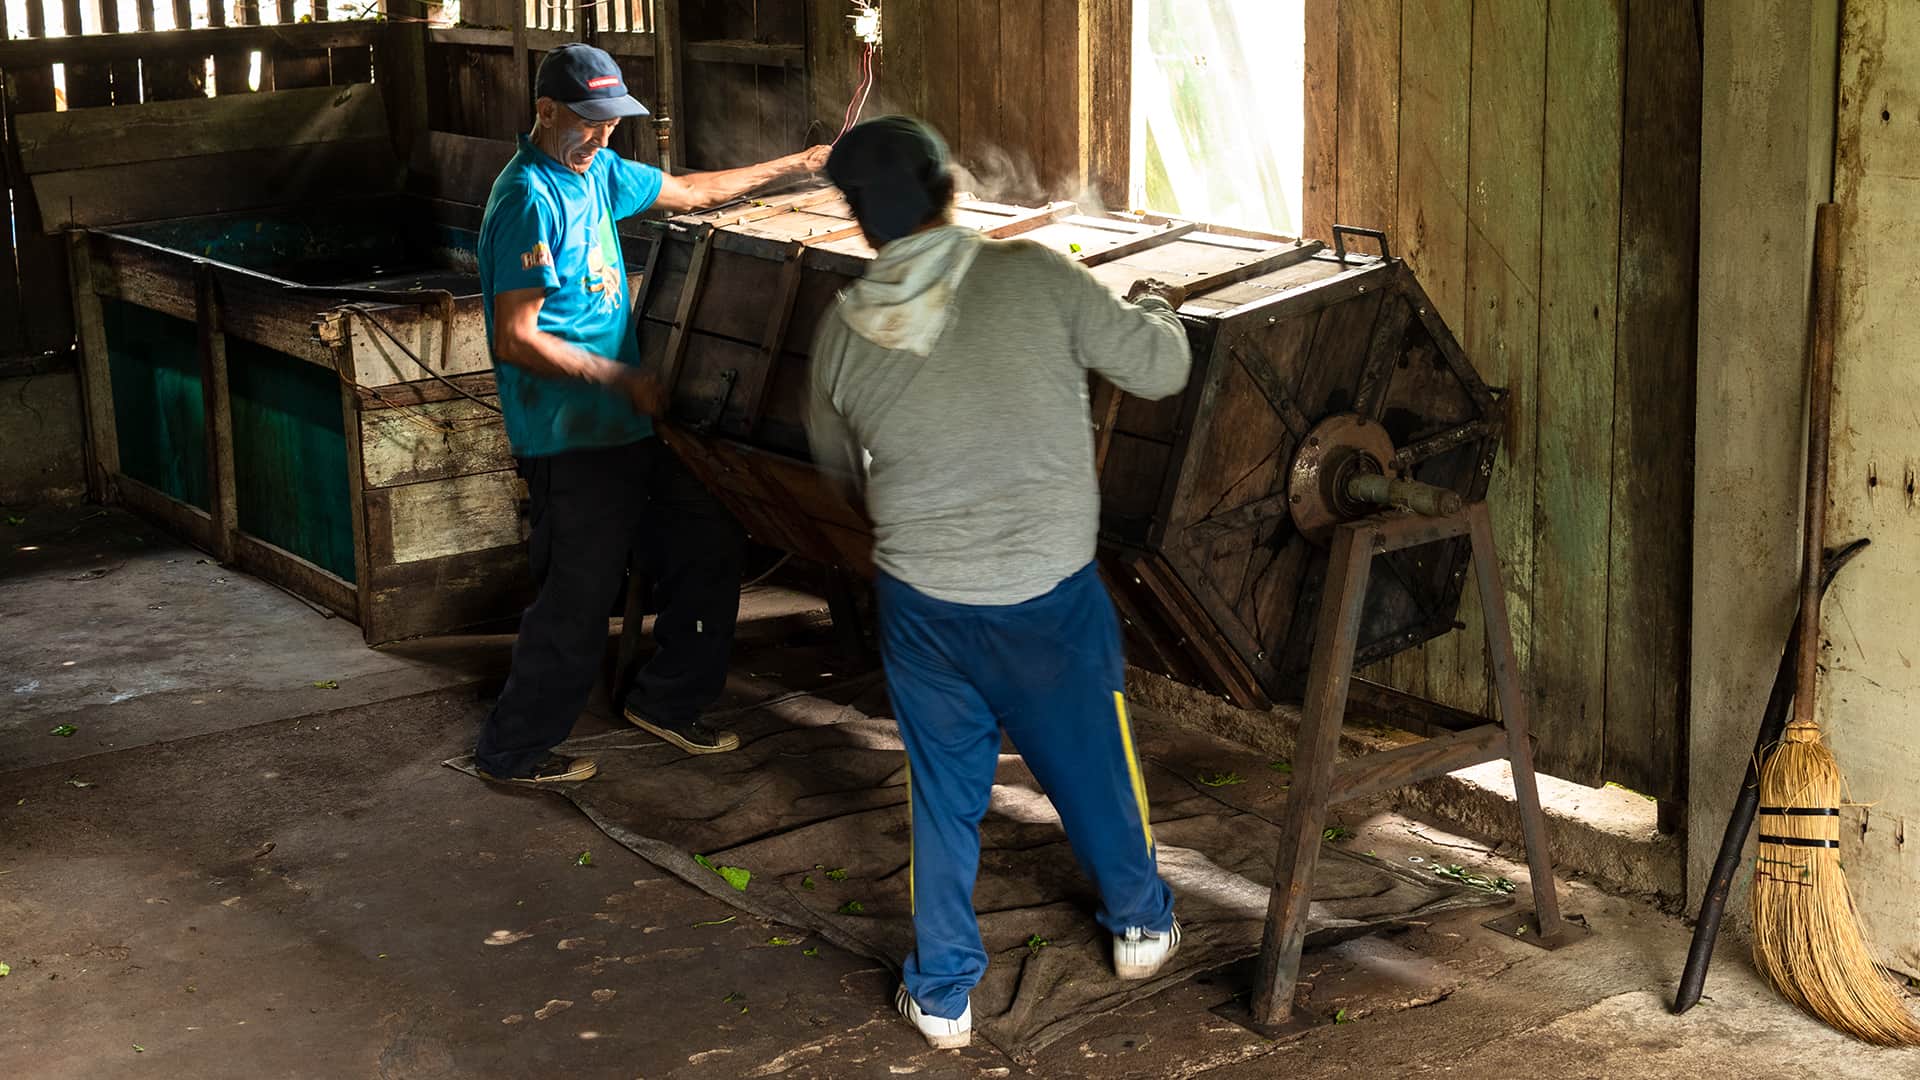 Two men moving a "barrel" as part of the tea processing